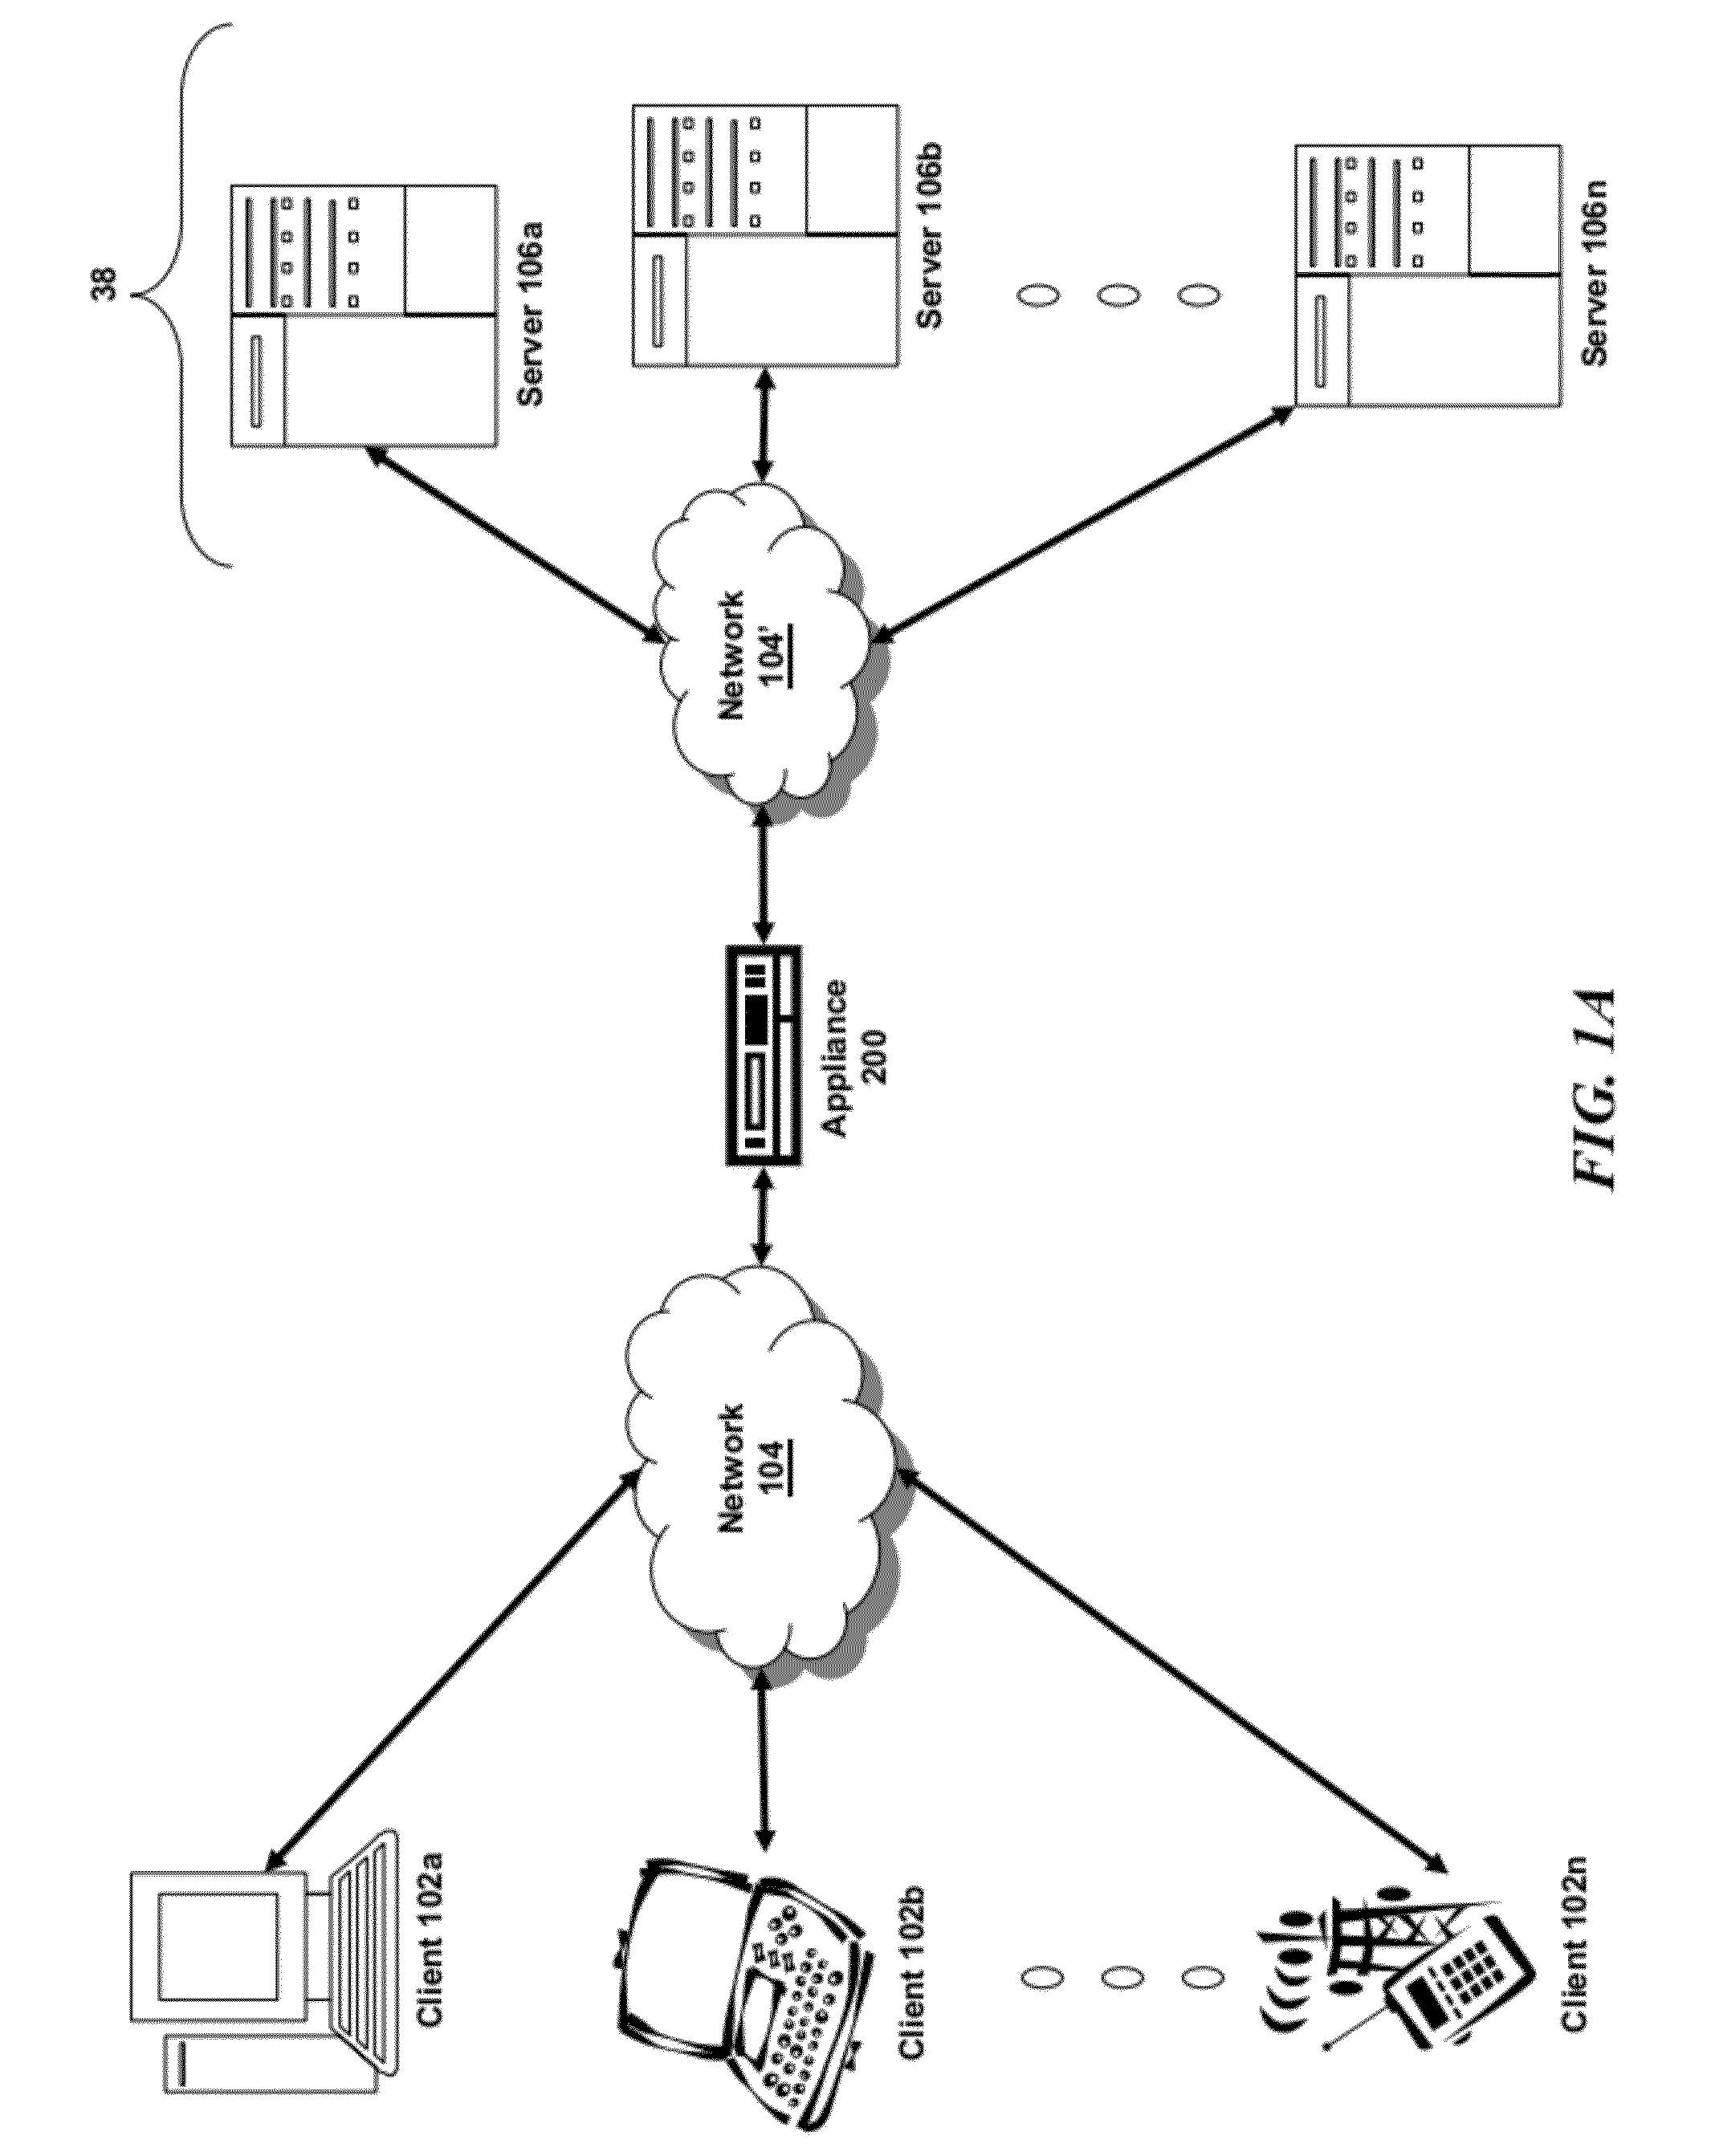 Systems and Methods for Policy Based Routing for Multiple Hops